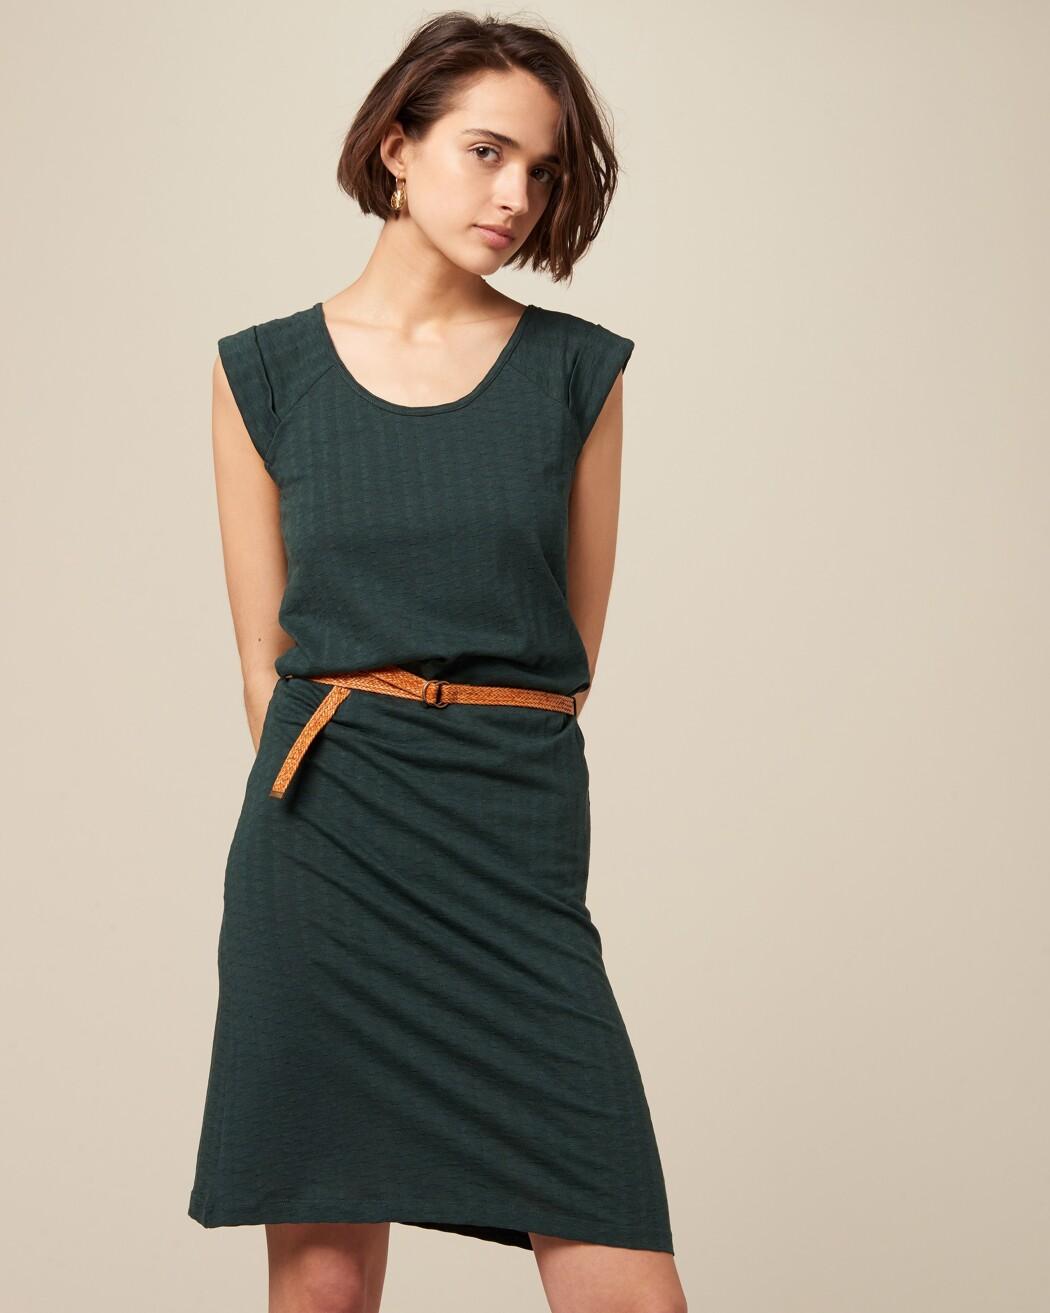 Sessun Sycamore Rainbow Jacquard Dress in Green | Lyst